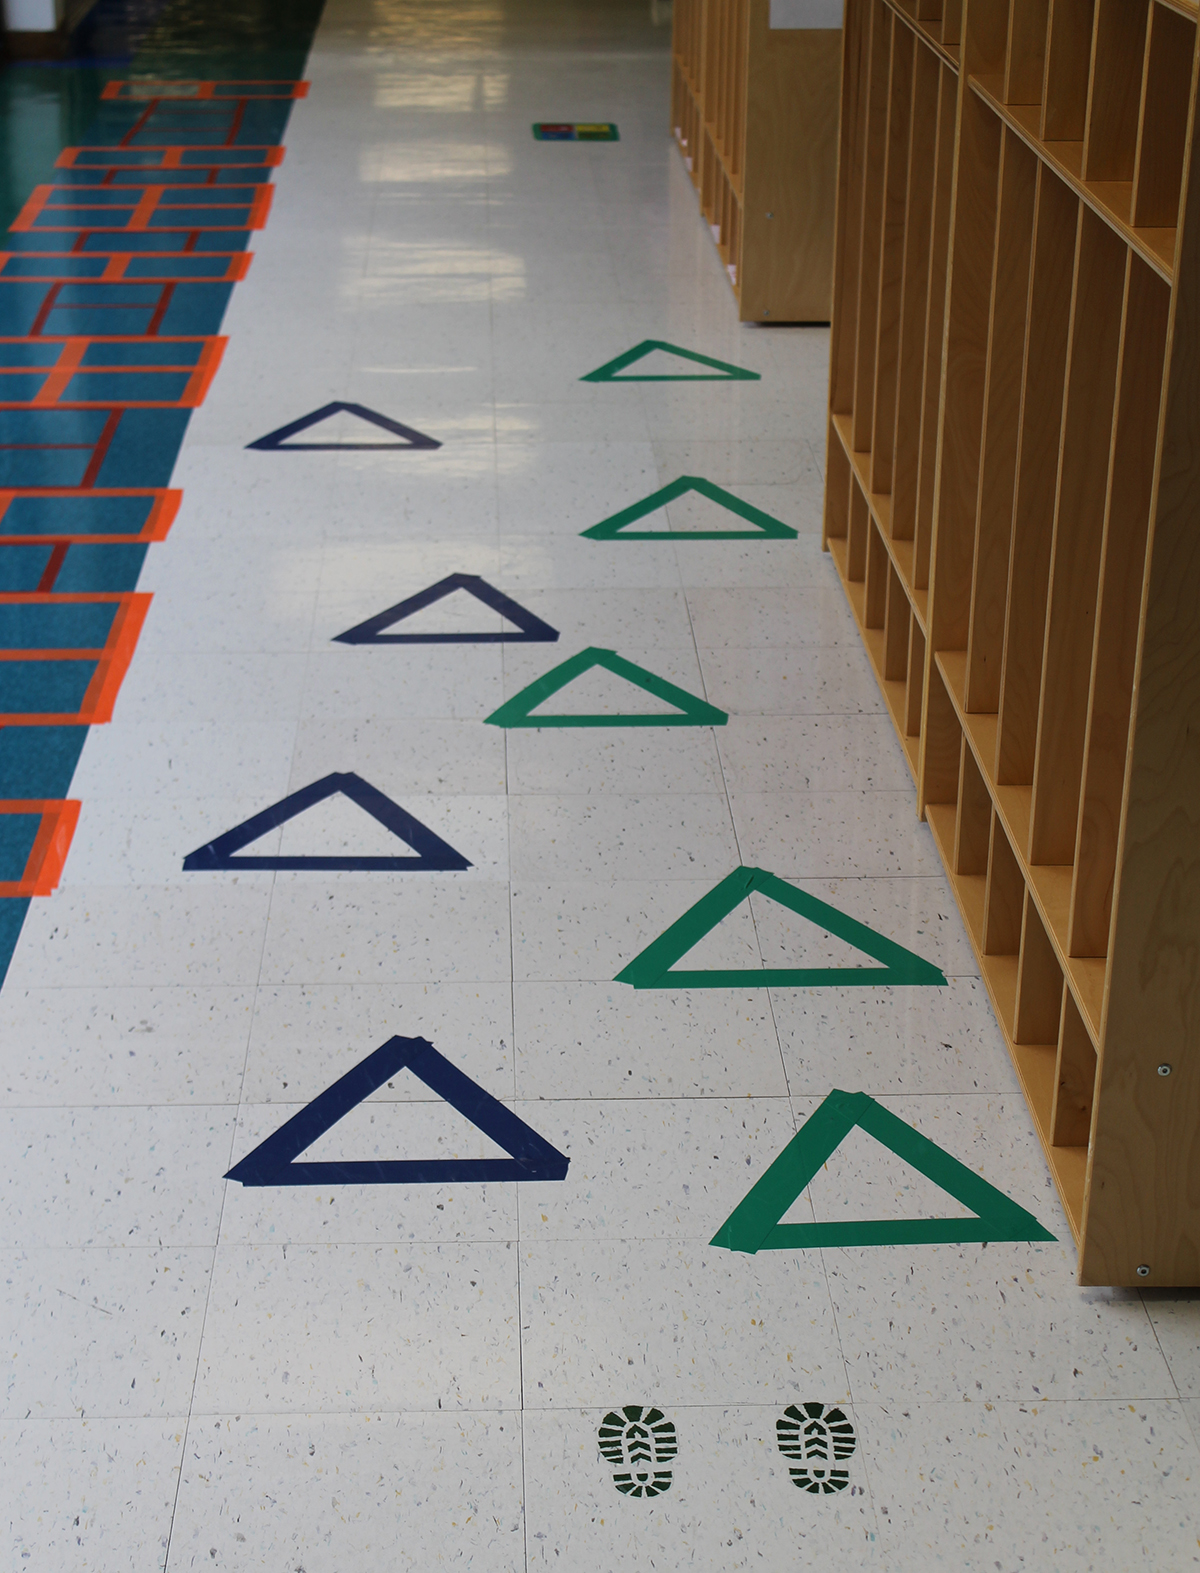 Triangle stickers on a hallway floor